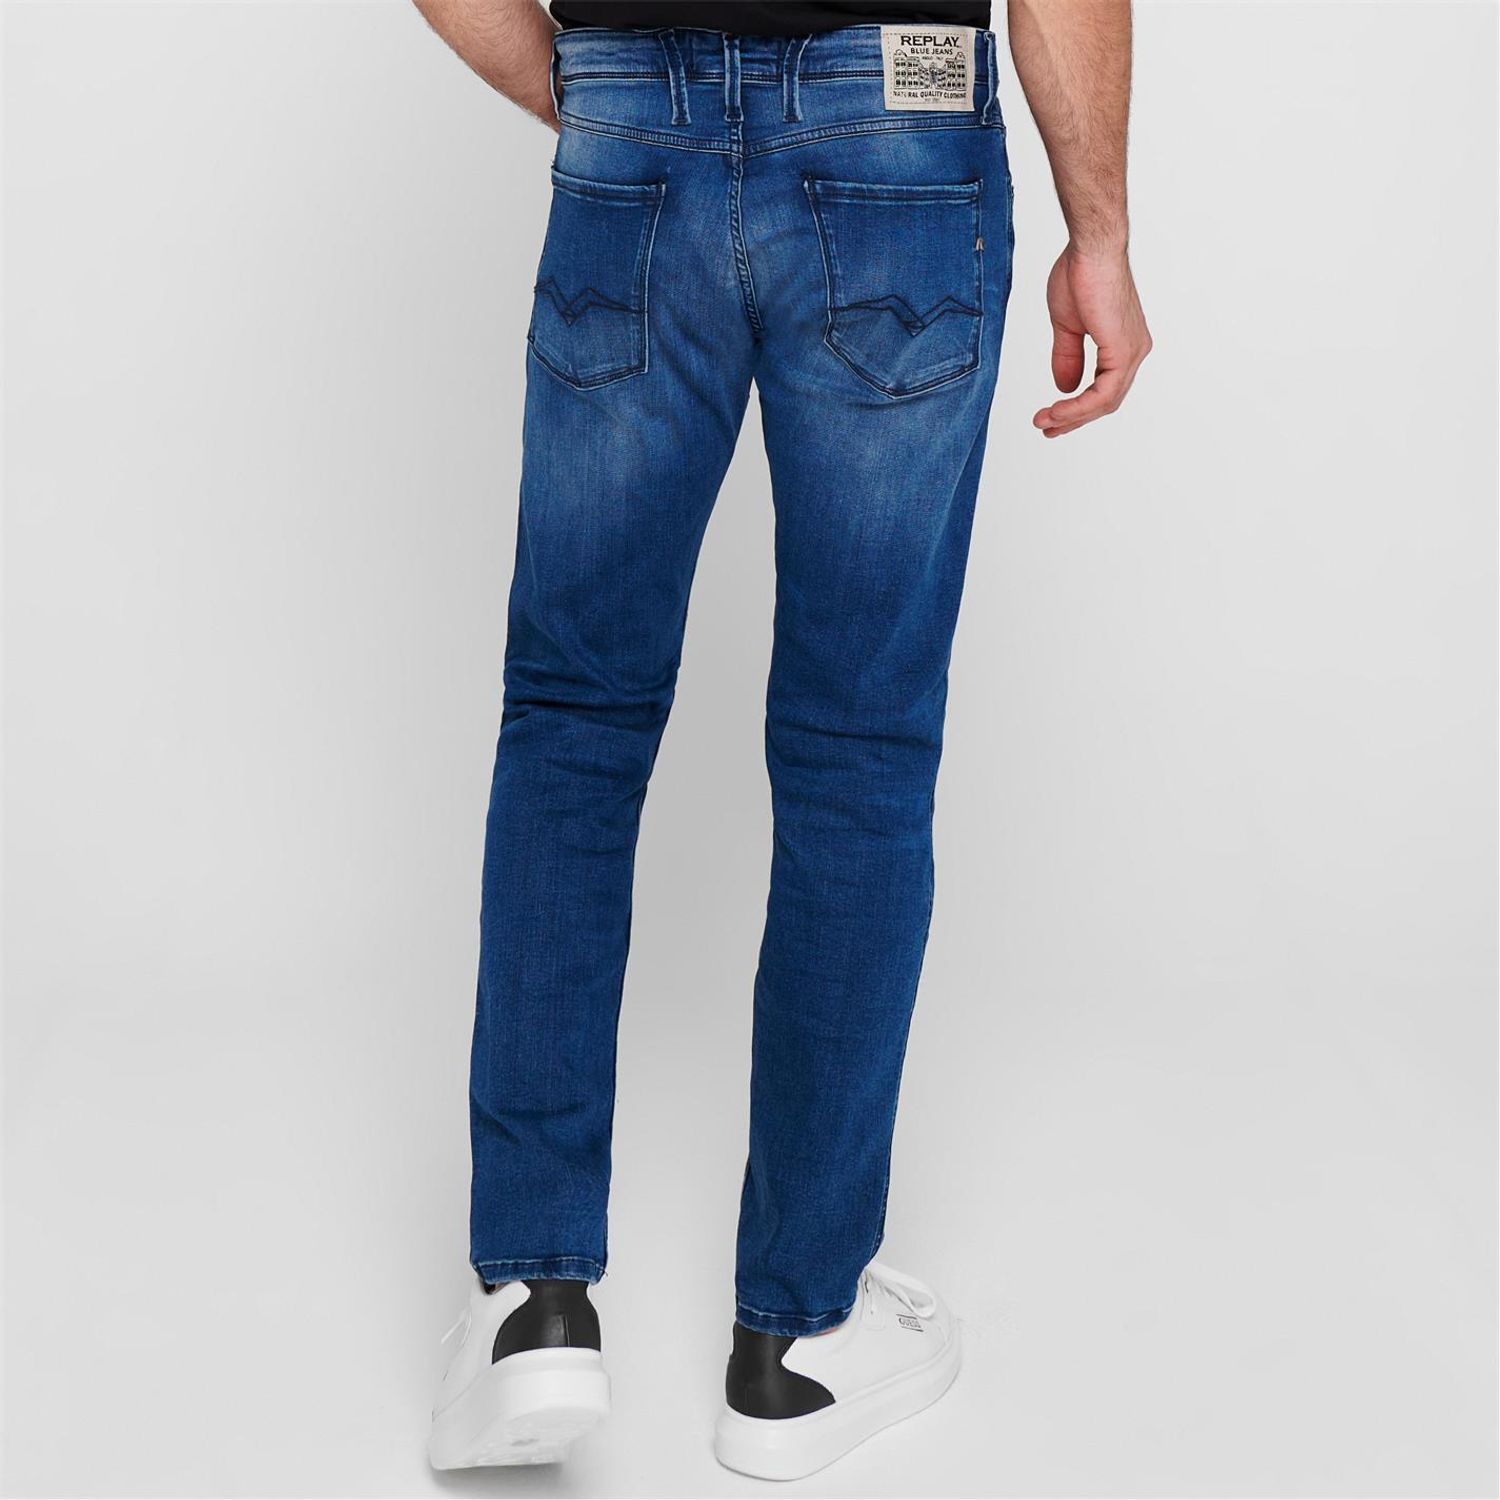 Blue Replay Anbass Slim Jeans - Get The Label